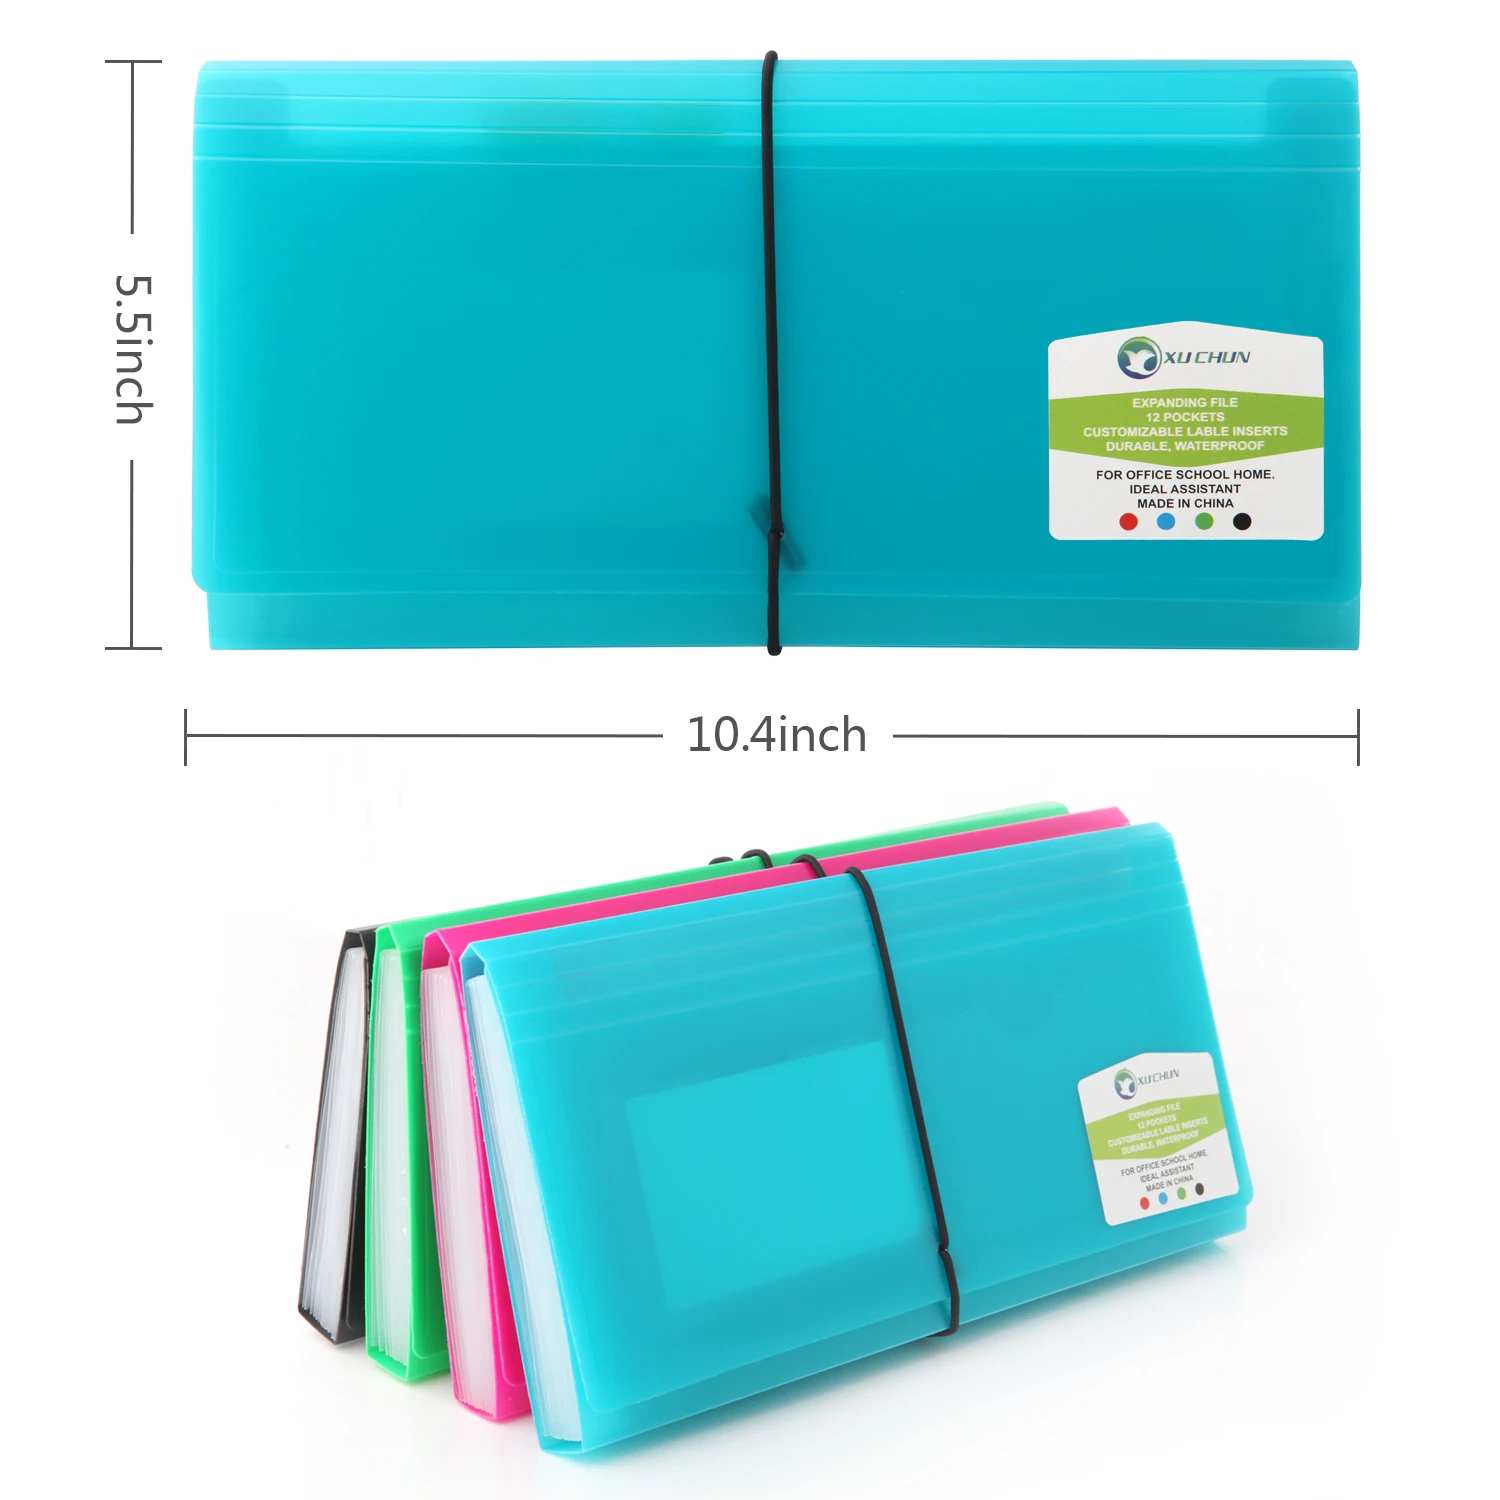 Blue Coupons Plastic Receipt Organizer Small Accordion File Organizer 13-Pocket Expanding File Folder for Receipts Cards Cash Tickets 